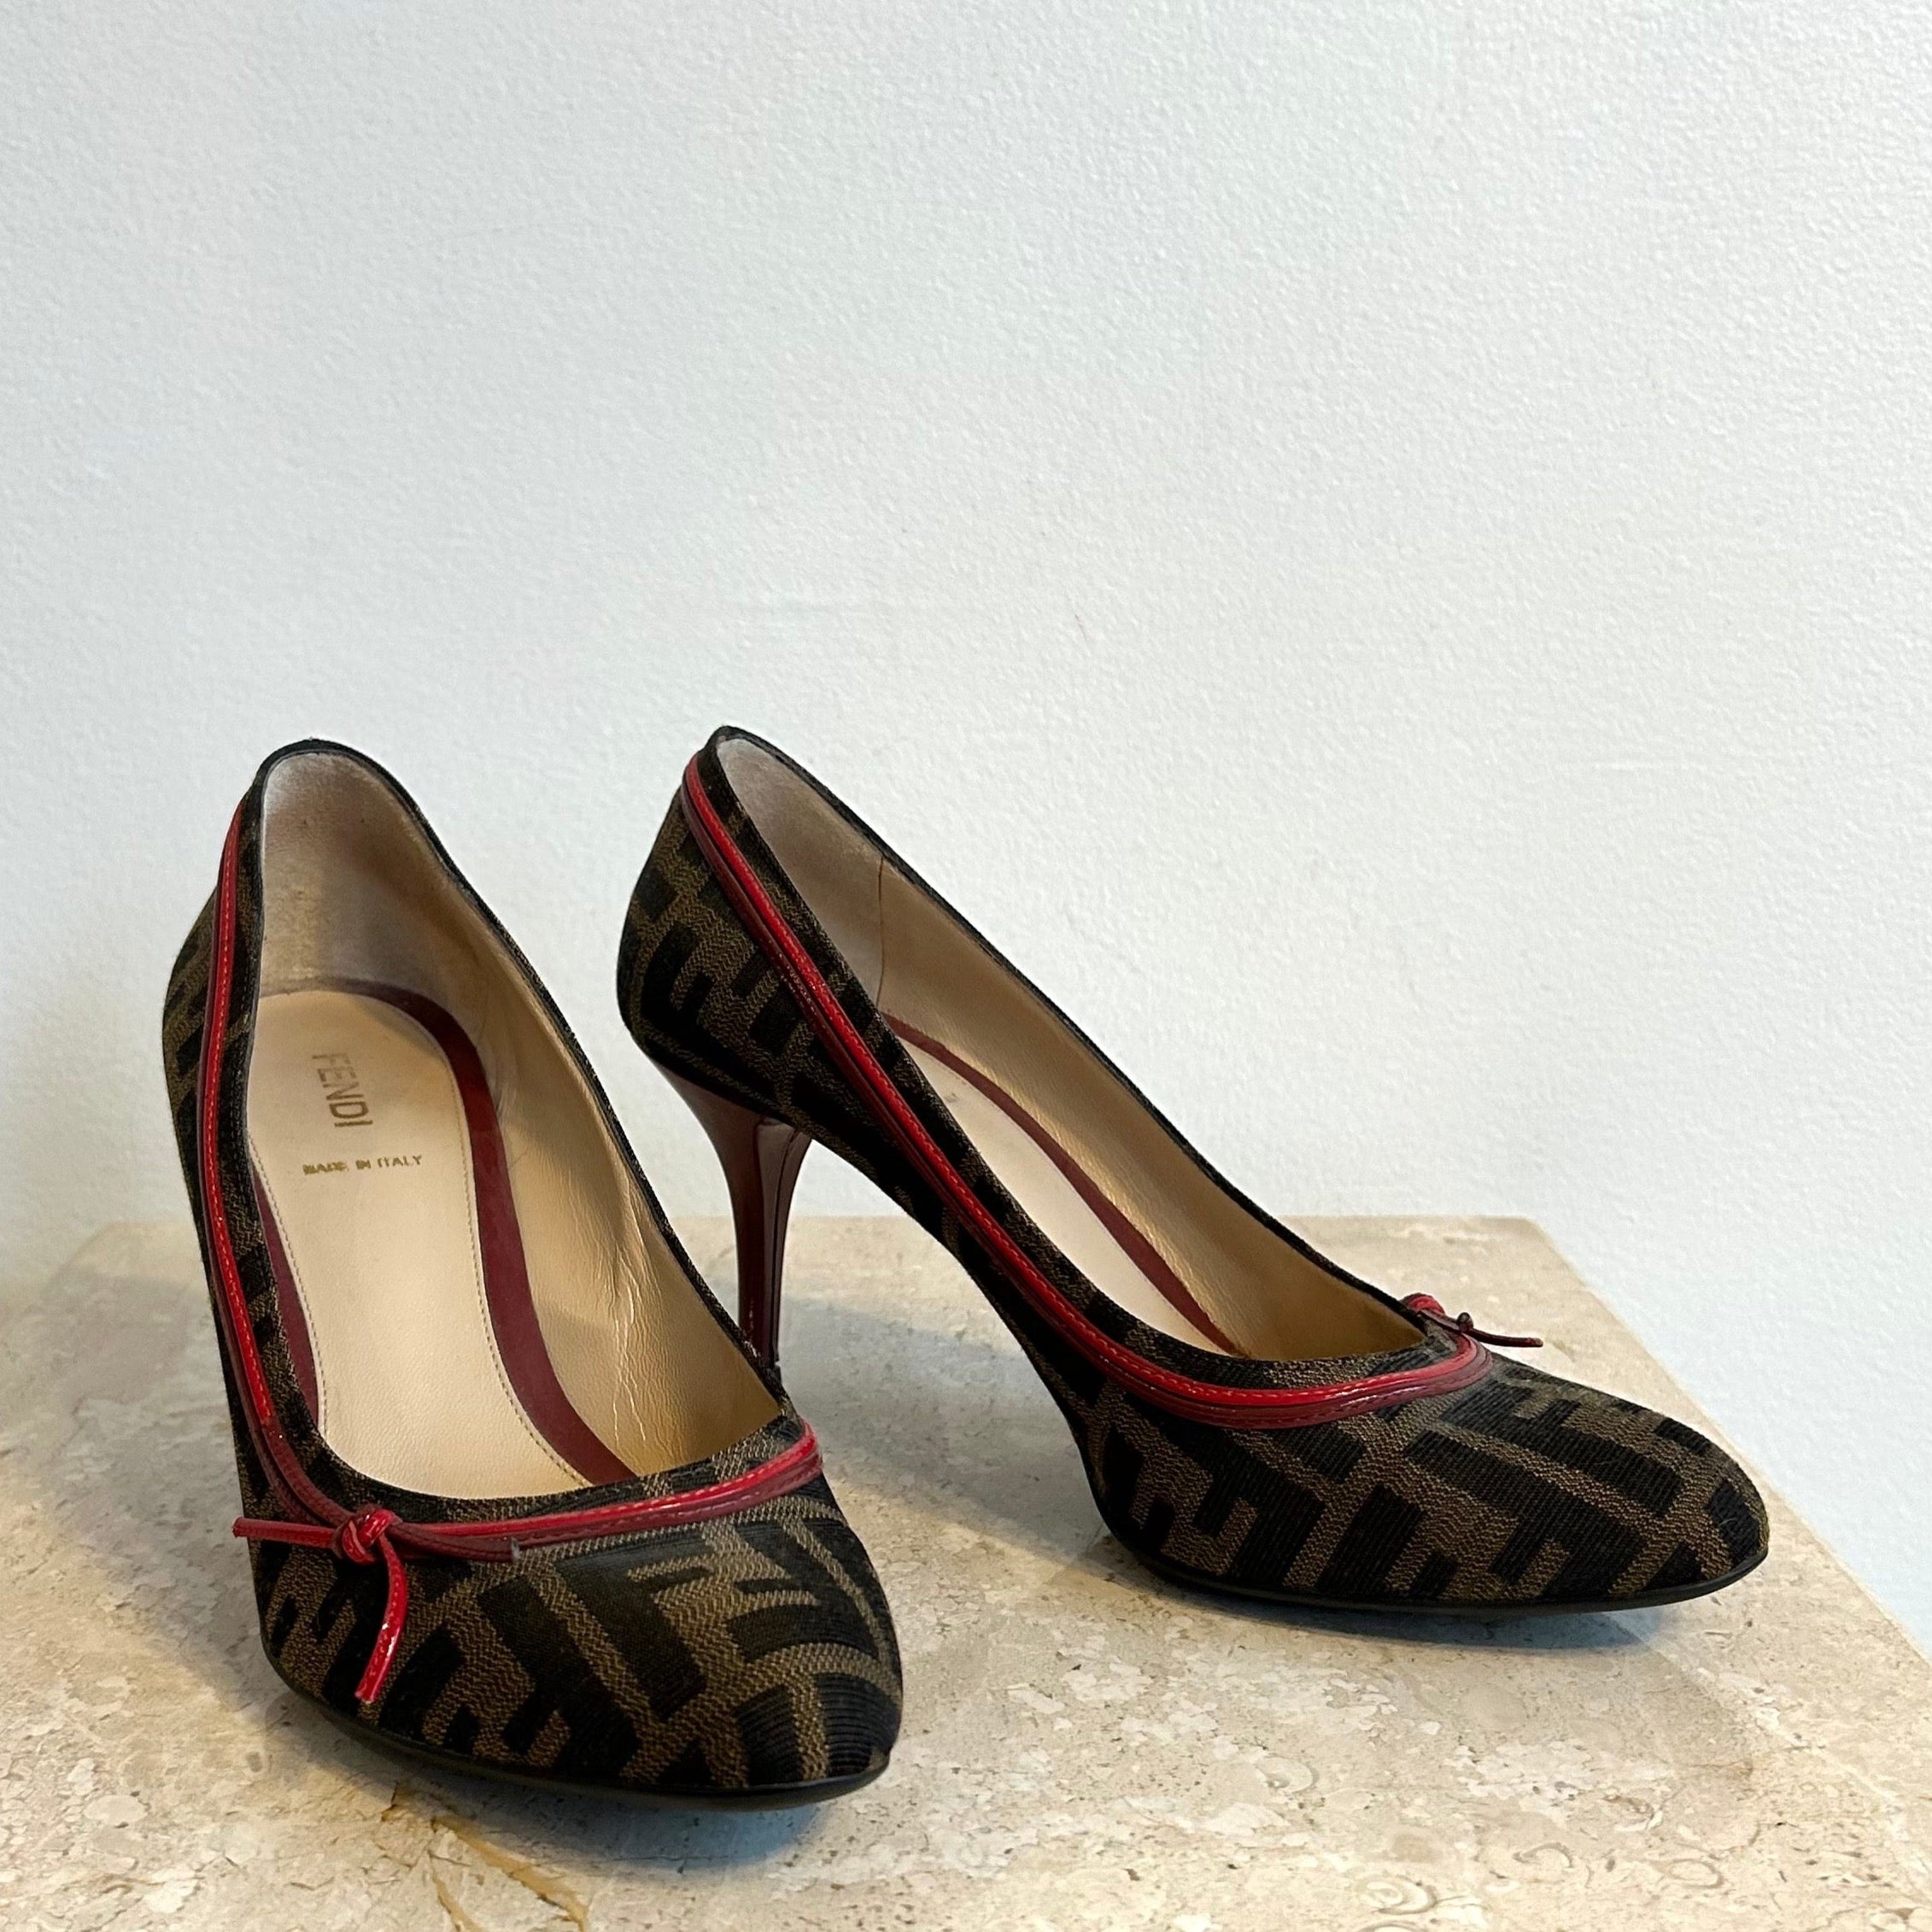 Pre-Owned FENDI Zucca Print Red Bow Pumps - Size 39